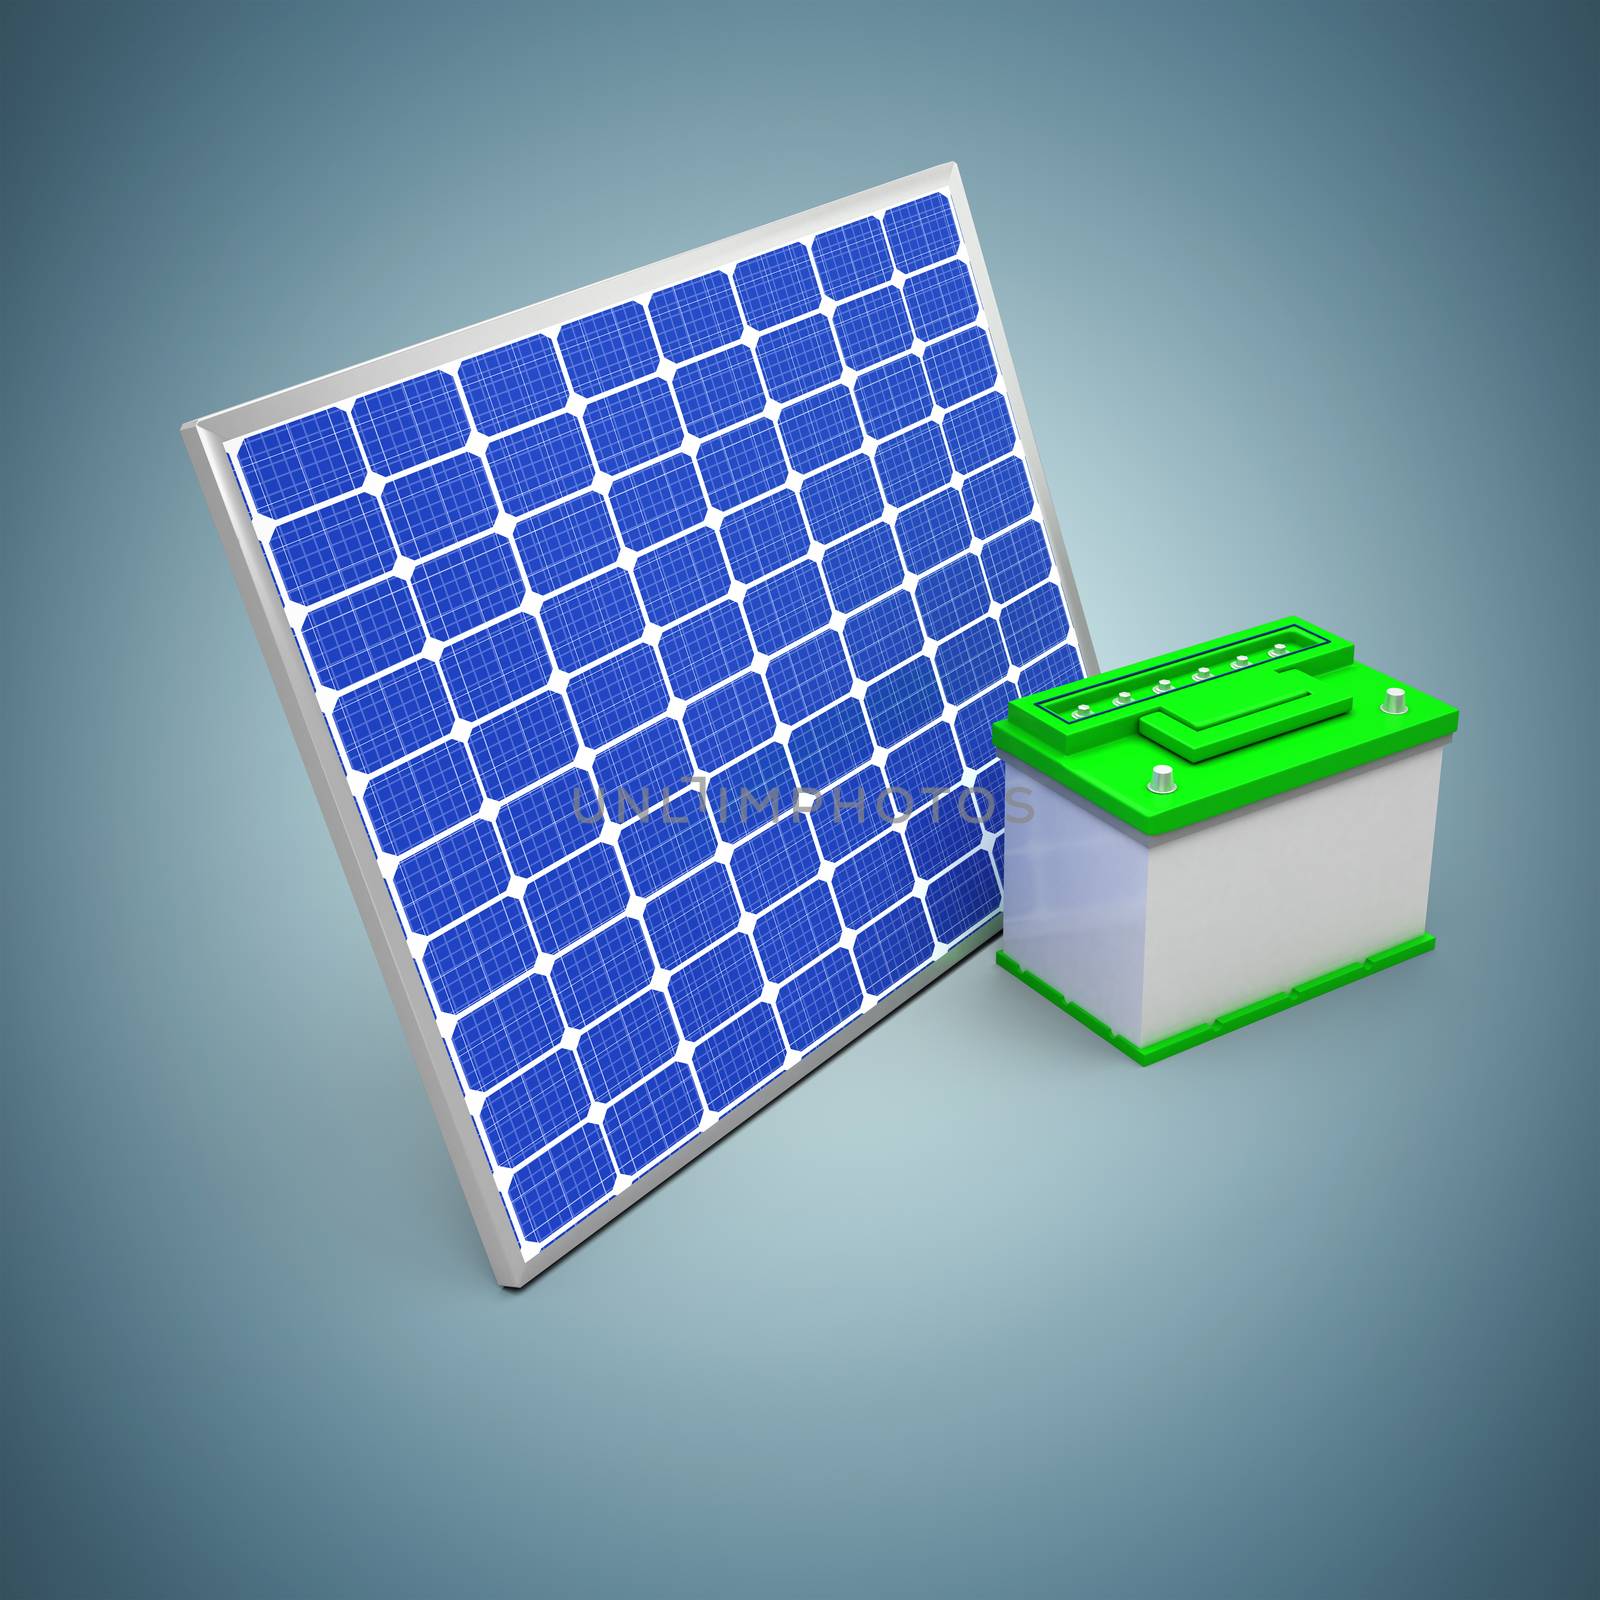 Composite image of 3d illustration of solar panel with battery by Wavebreakmedia